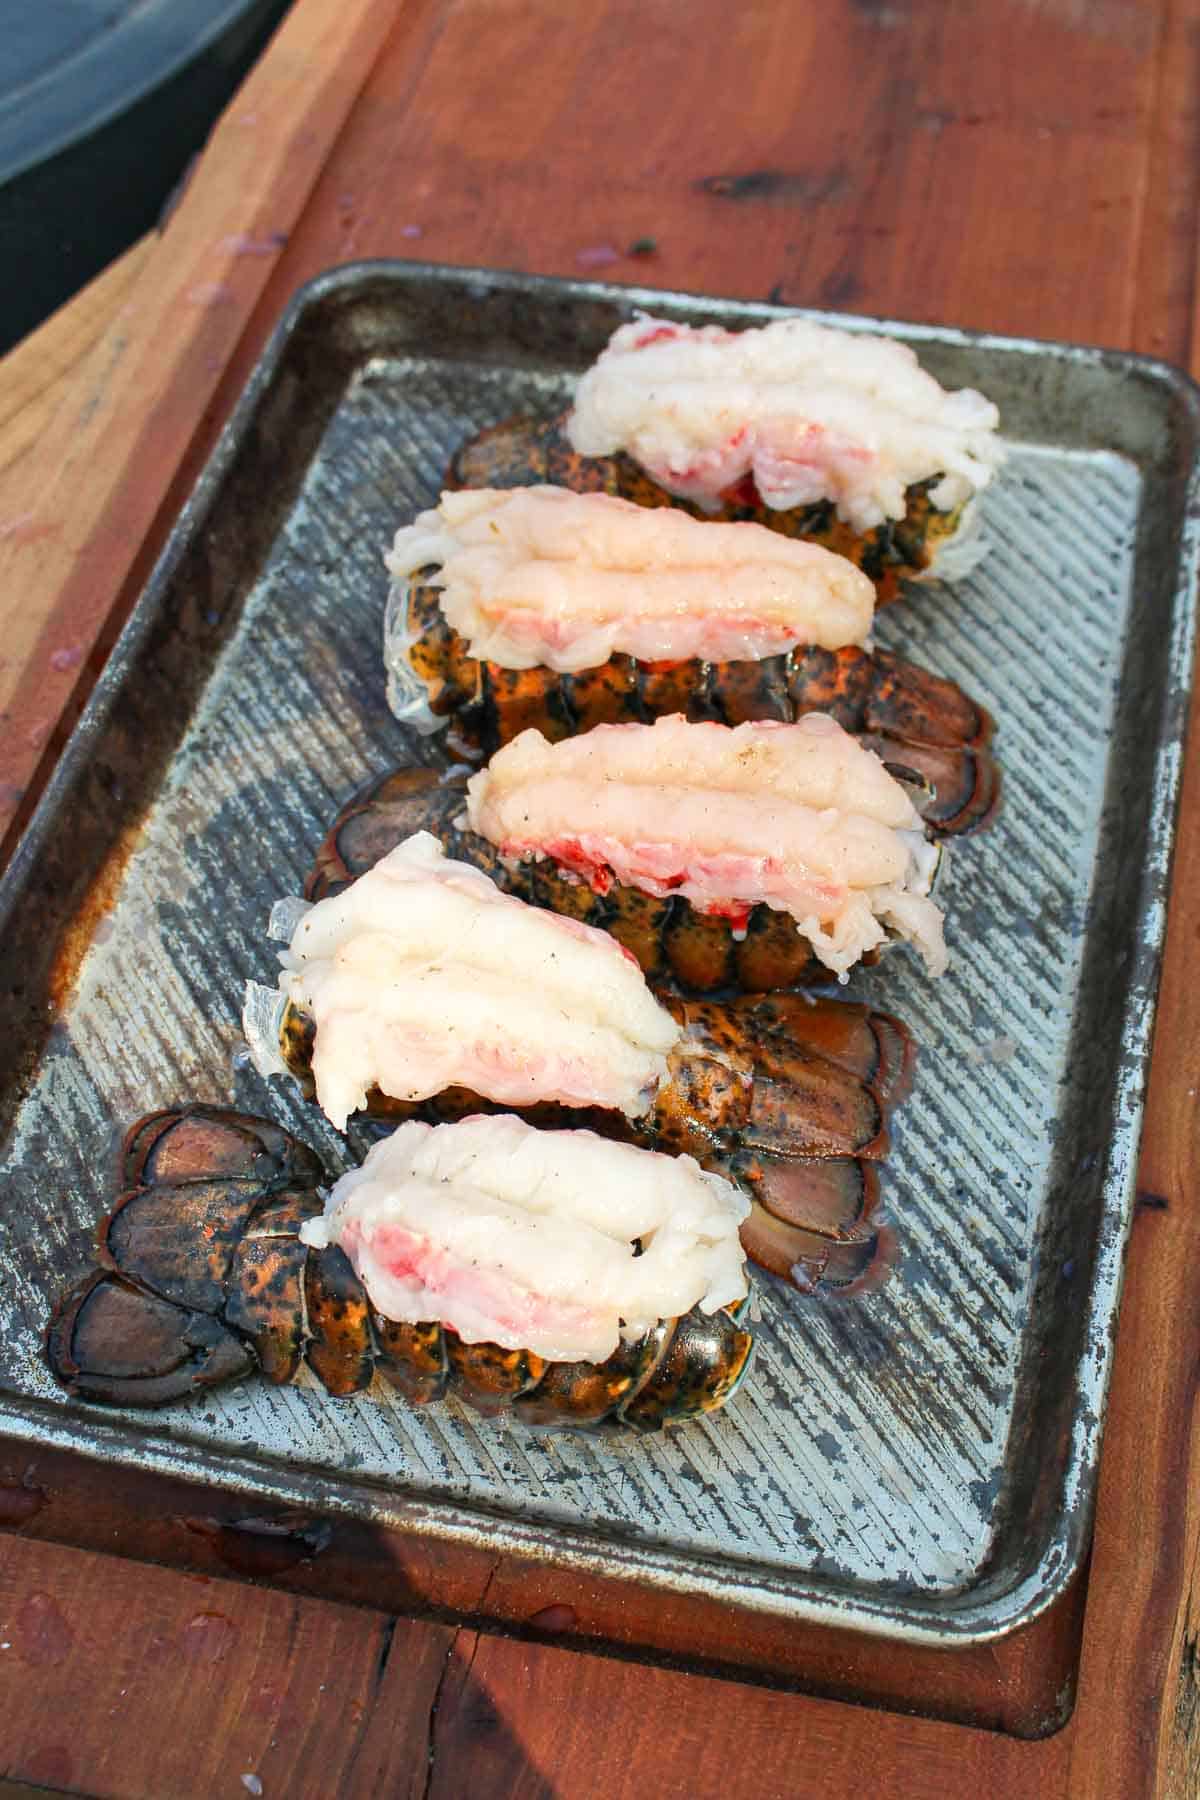 The butterflied lobster tails ready to be stuffed.